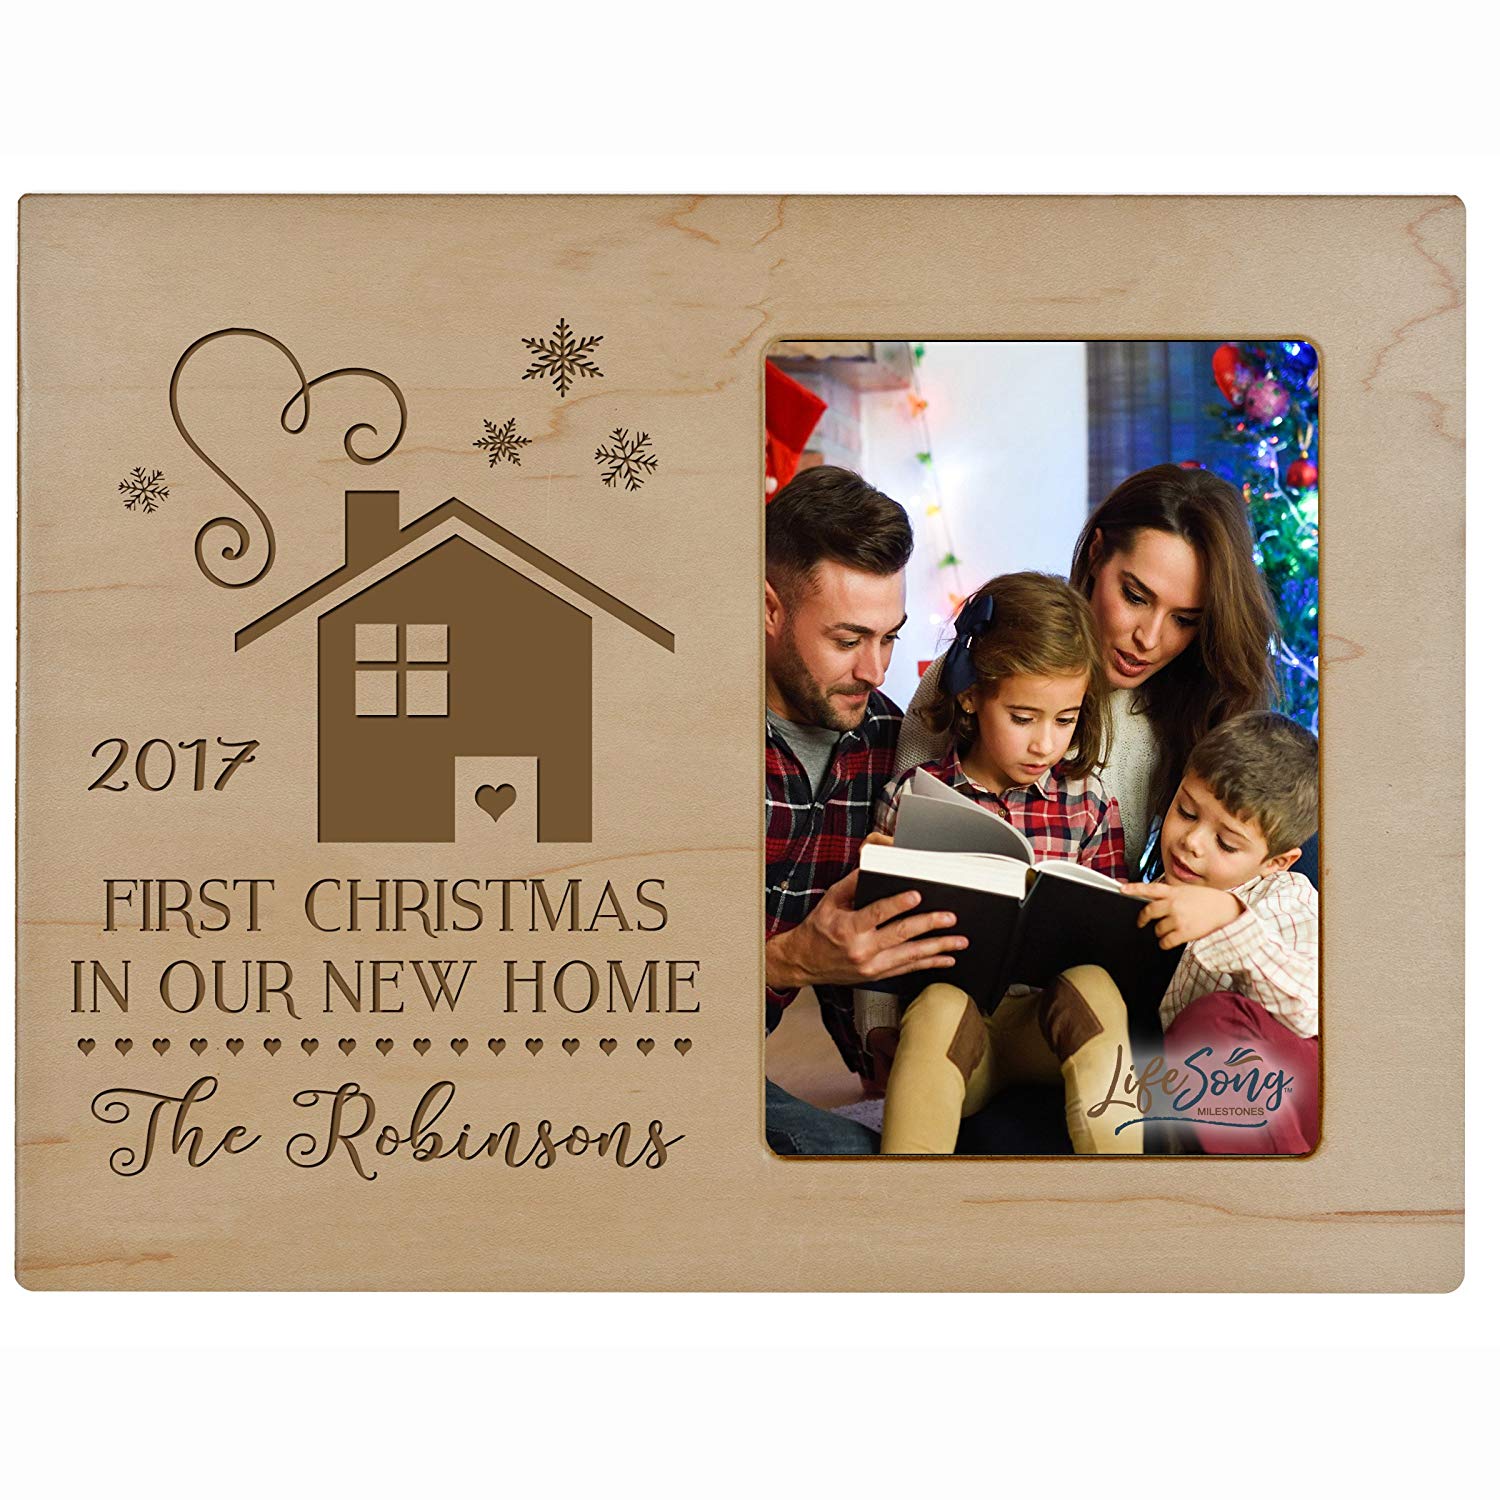 Personalized Home Christmas Photo Frame Holds 4x6 Photograph - LifeSong Milestones